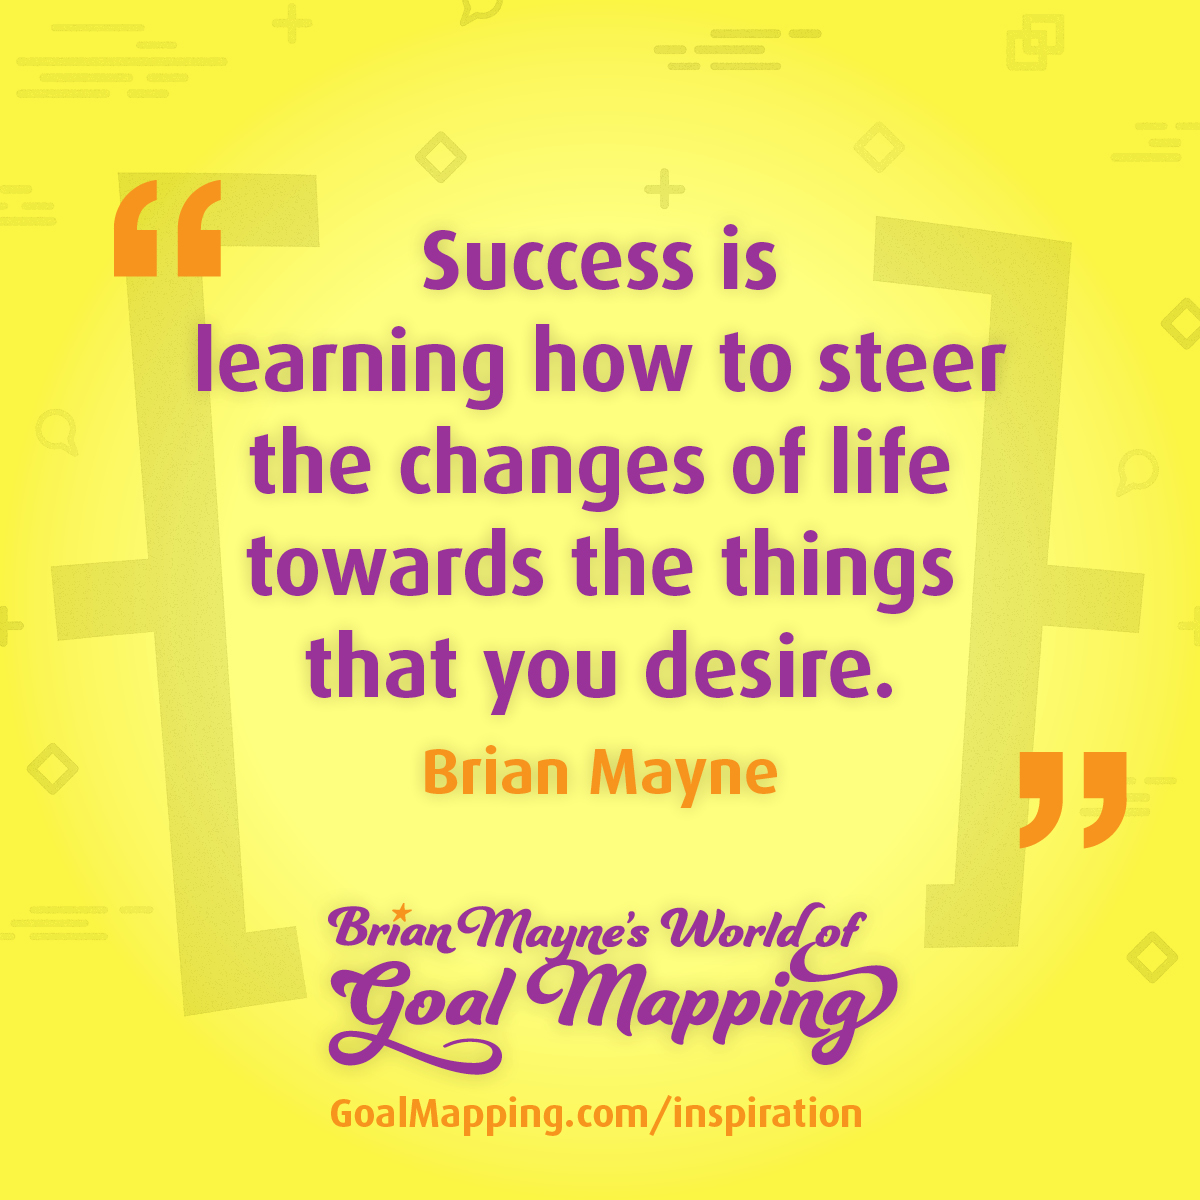 "Success is learning how to steer the changes of life towards the things that you desire." Brian Mayne